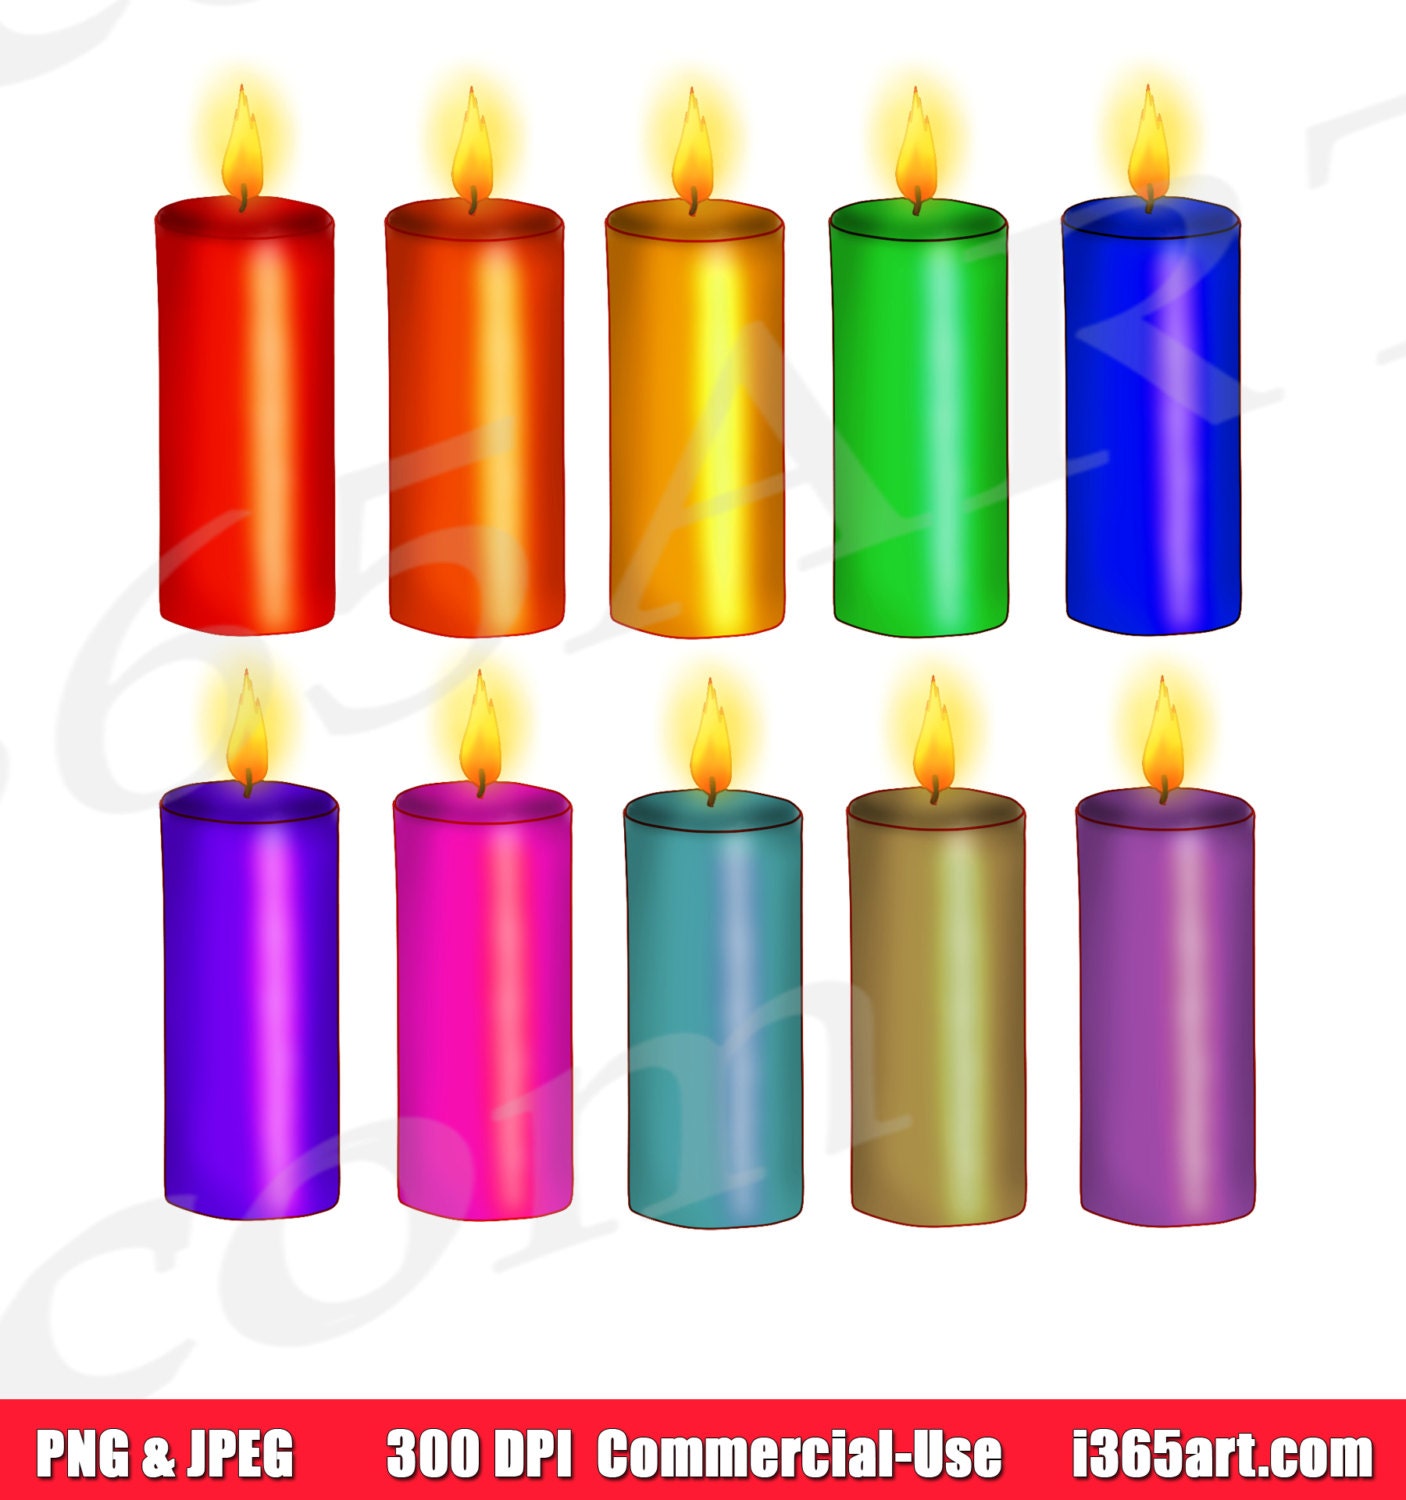 Buy 3 Get 1 Free Birthday Candles Clipart Candles Clipart Etsy